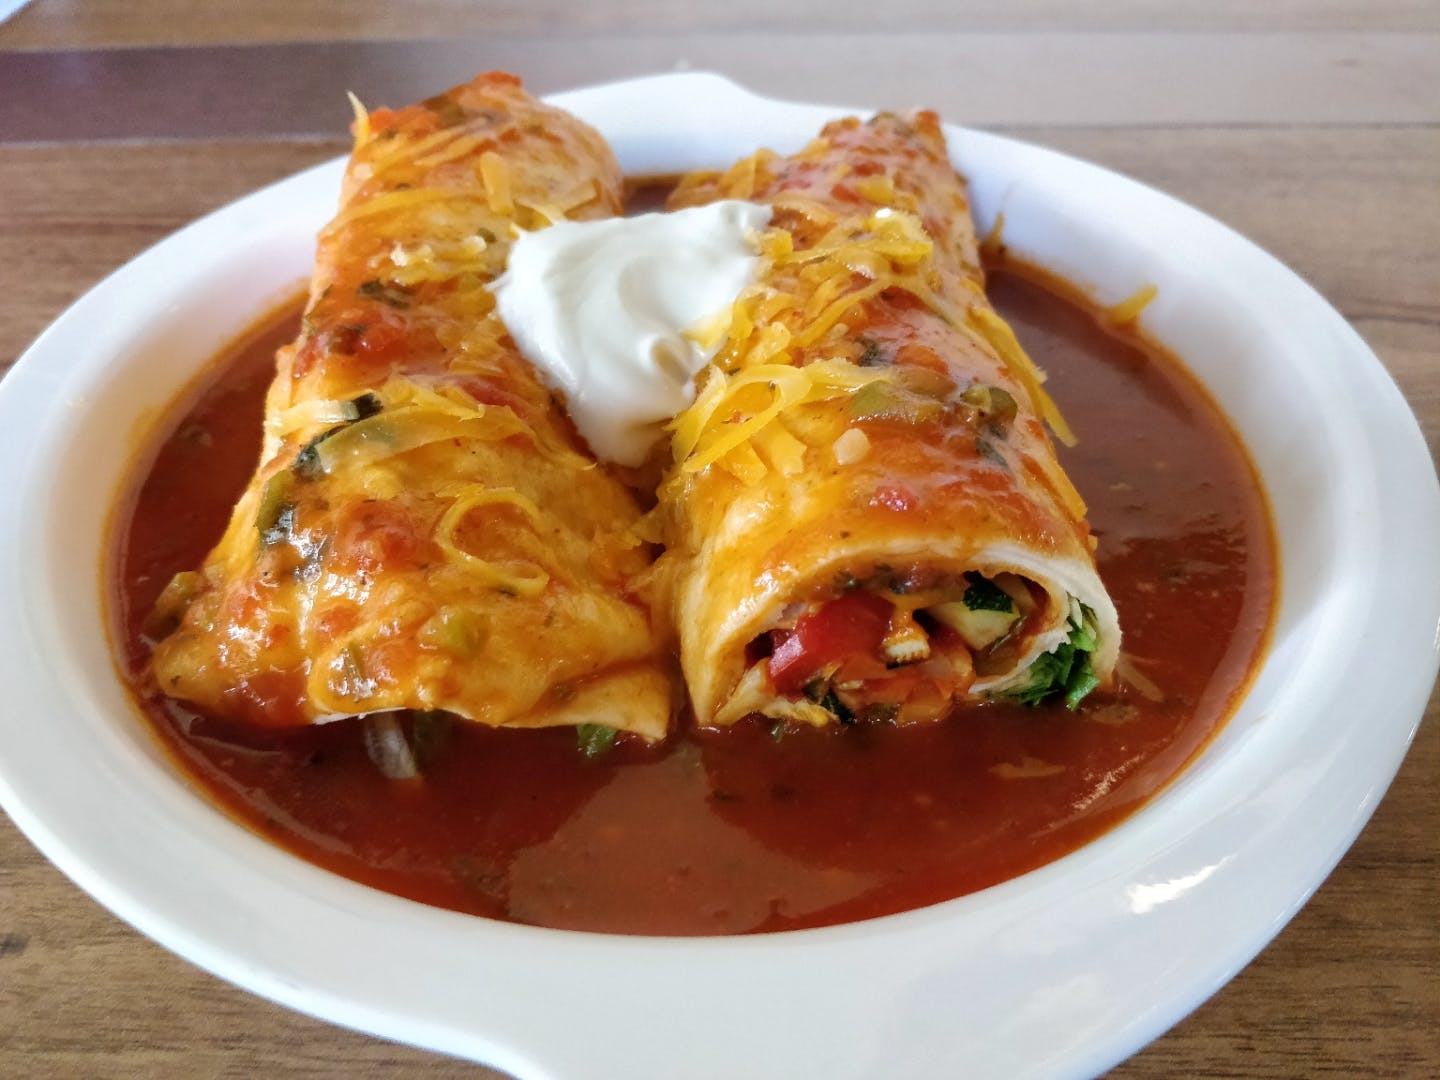 Dish,Food,Cuisine,Taquito,Cannelloni,Ingredient,Produce,Filo,Staple food,Spring roll